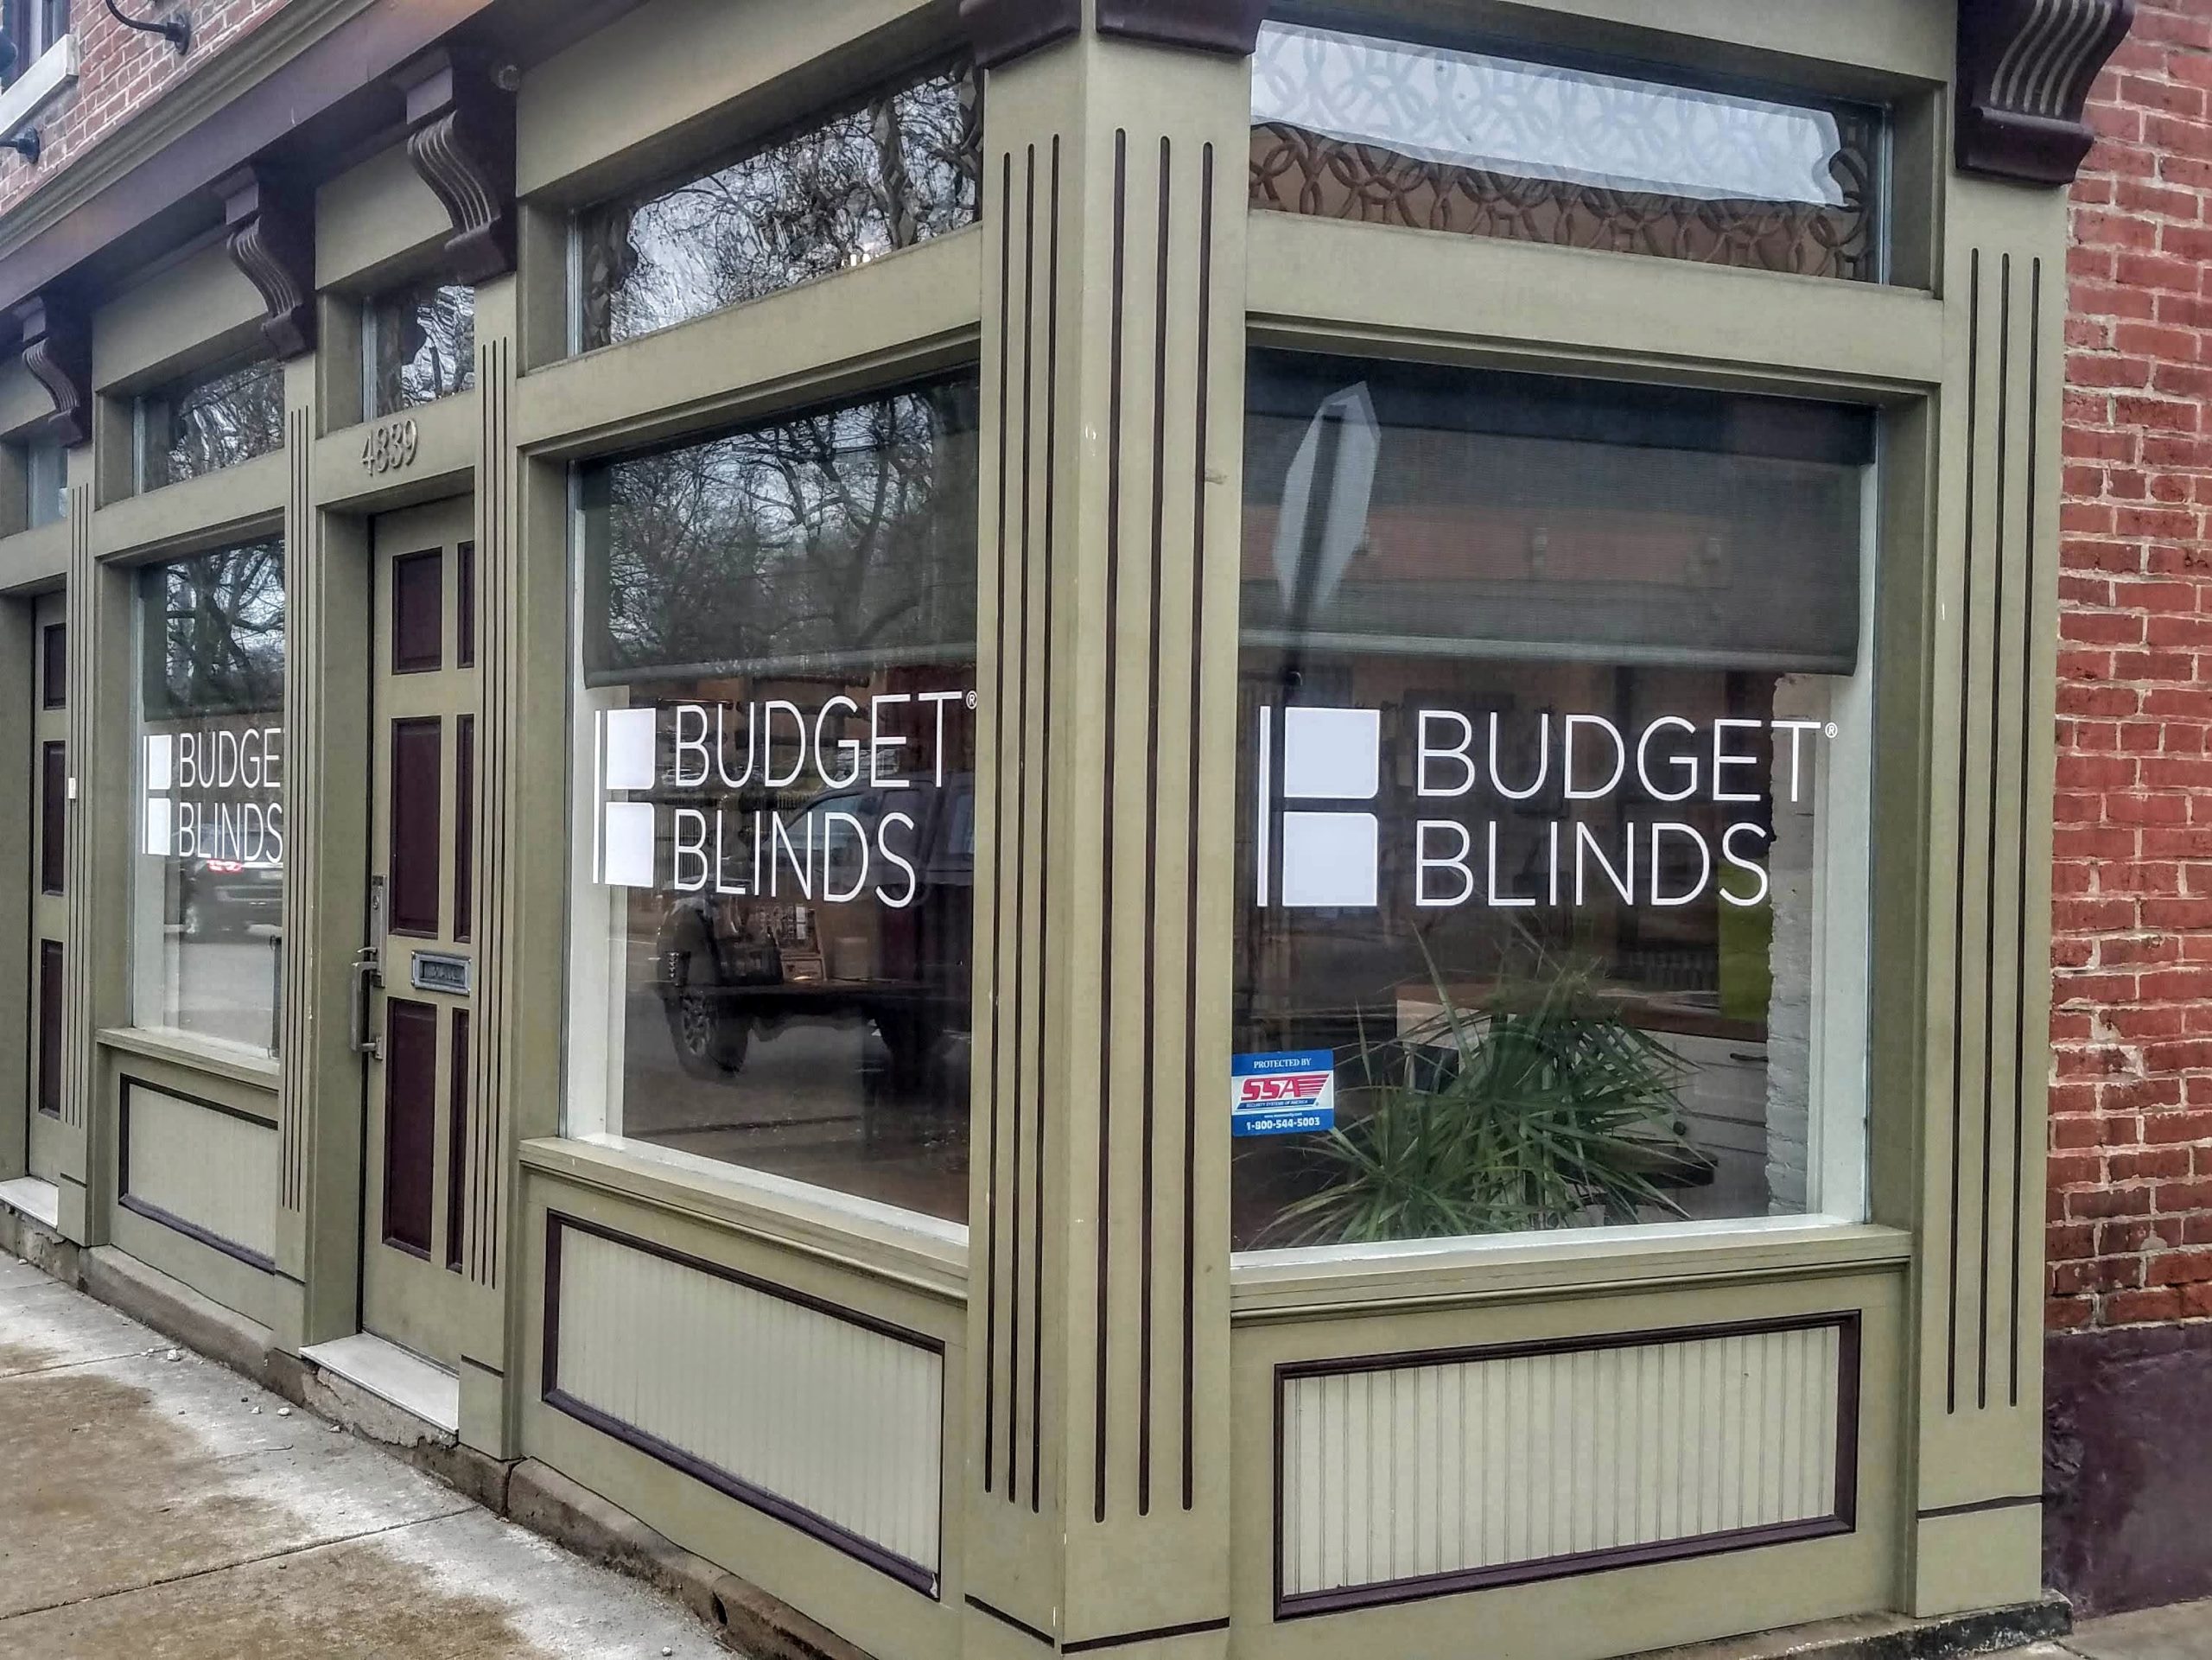 Budget Blinds window graphic 